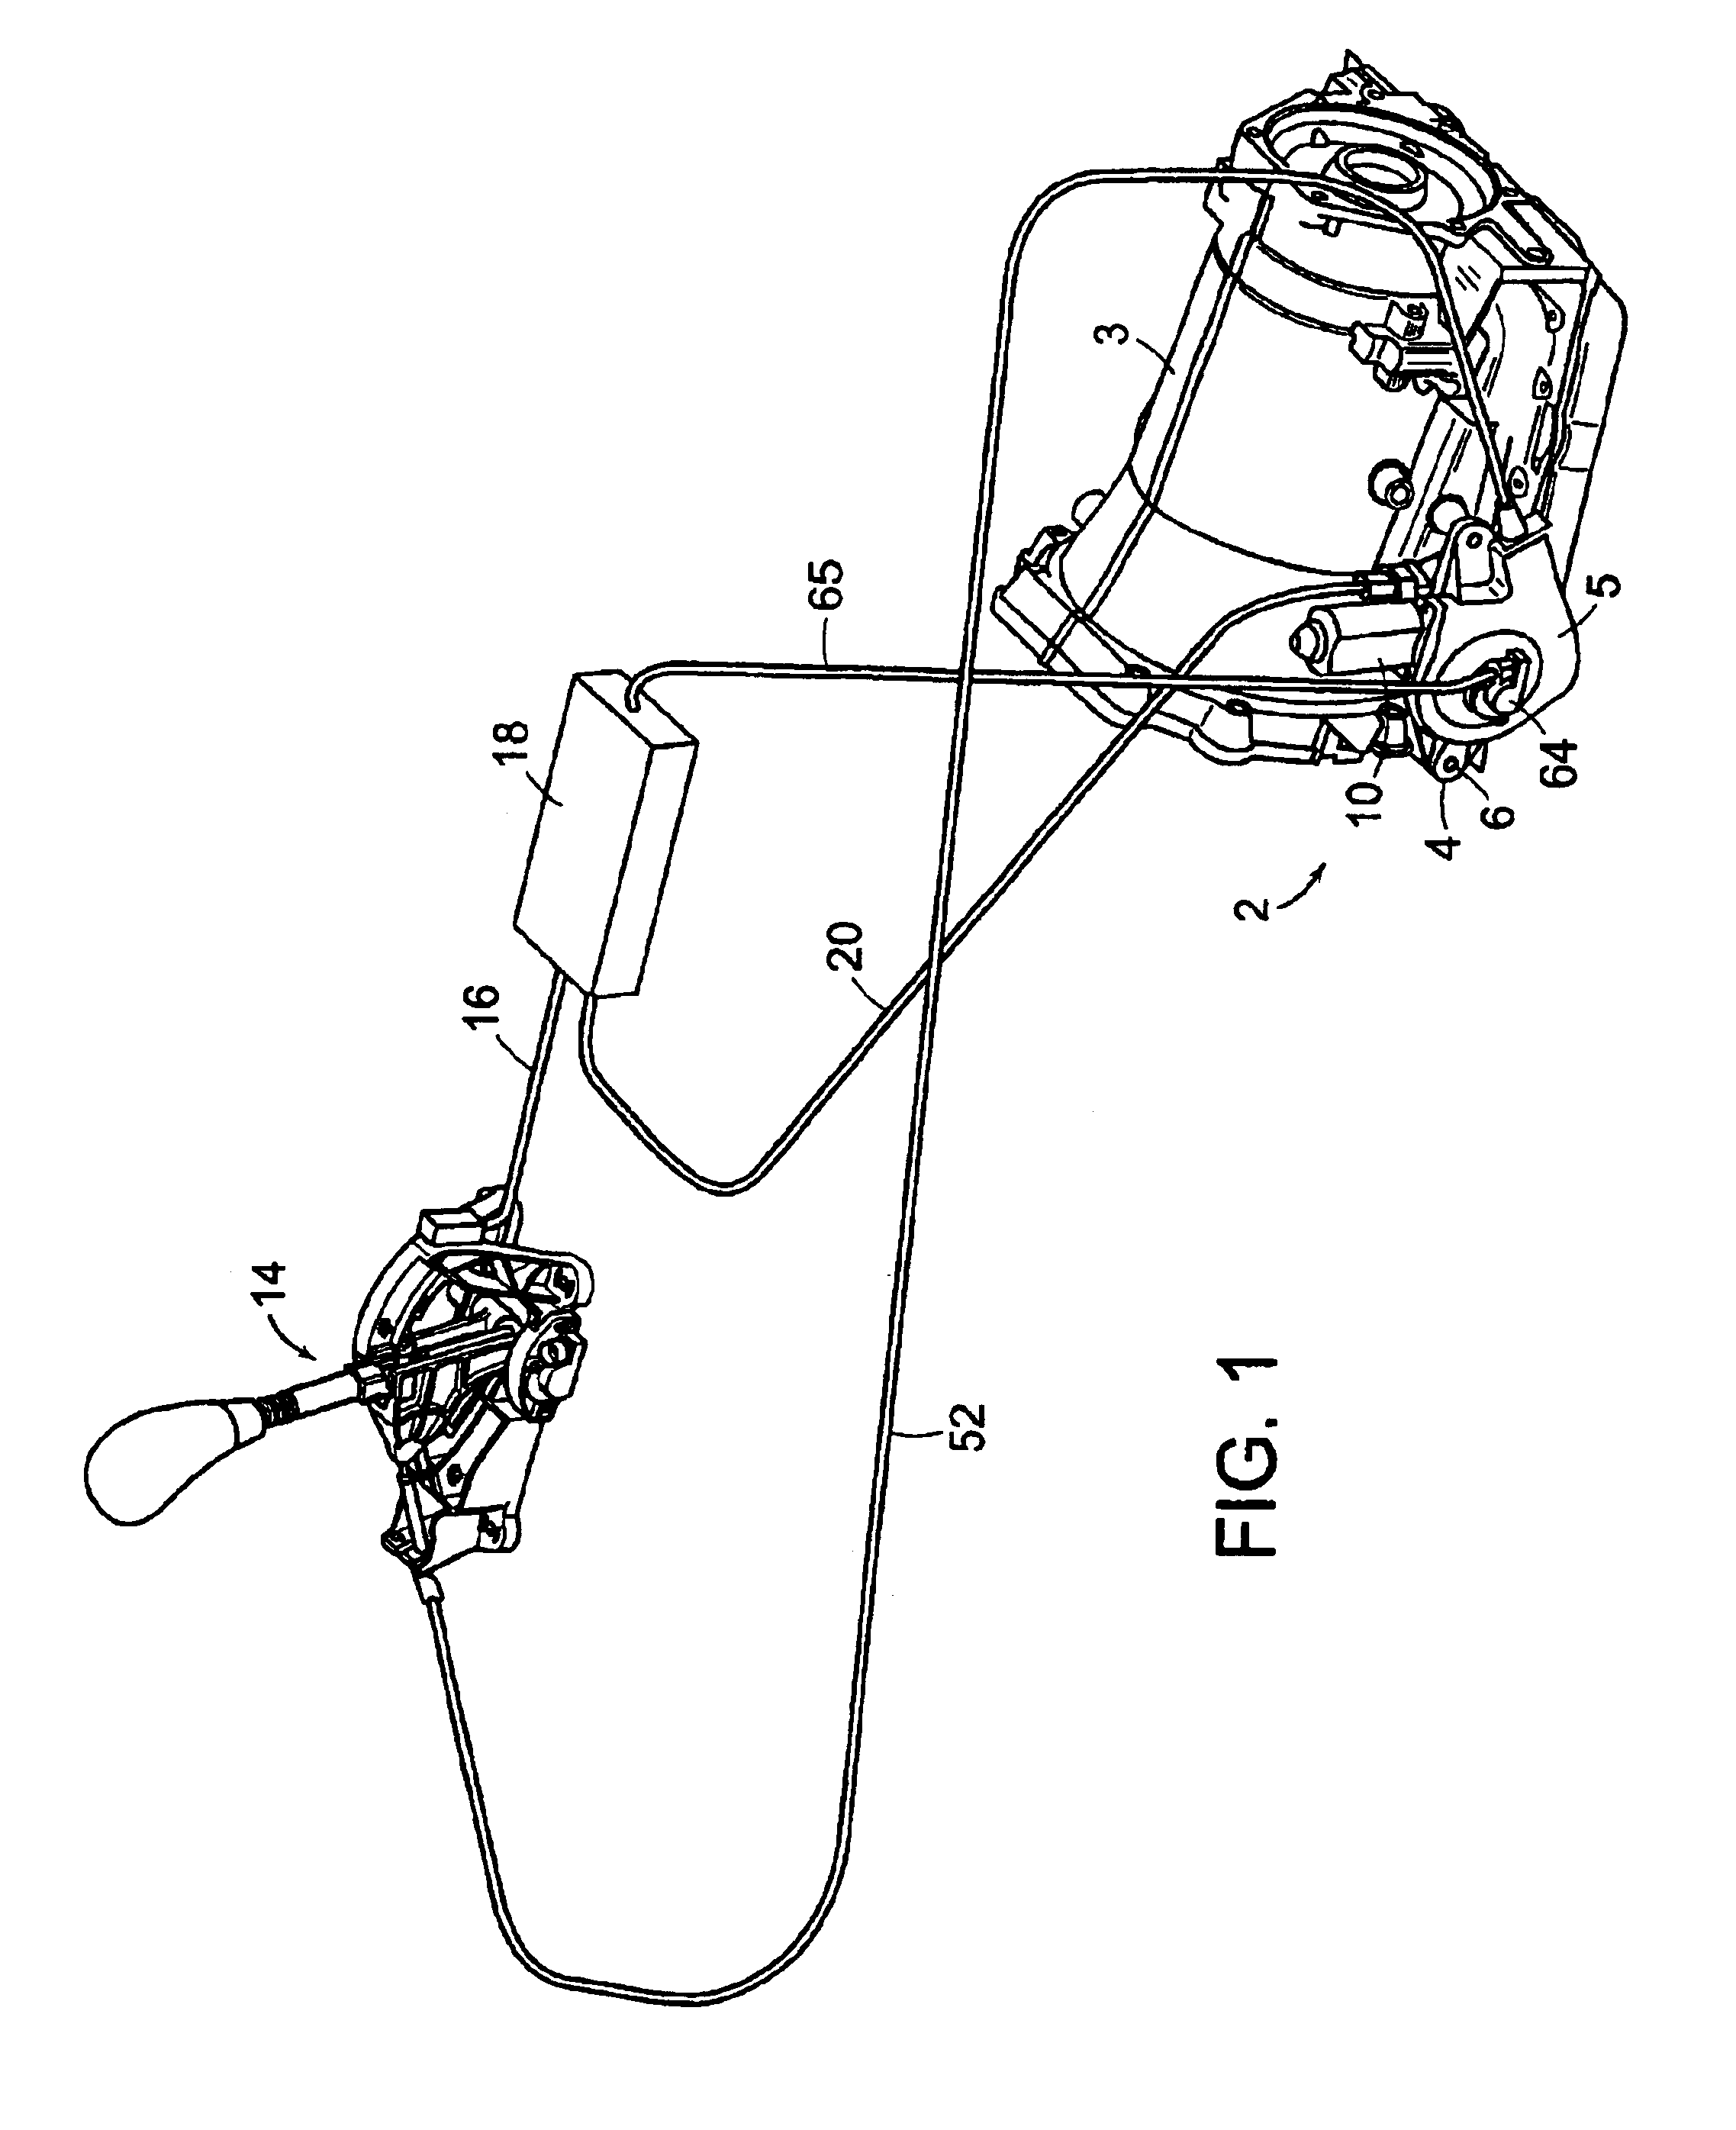 Shift-by-wire transmission actuator assembly